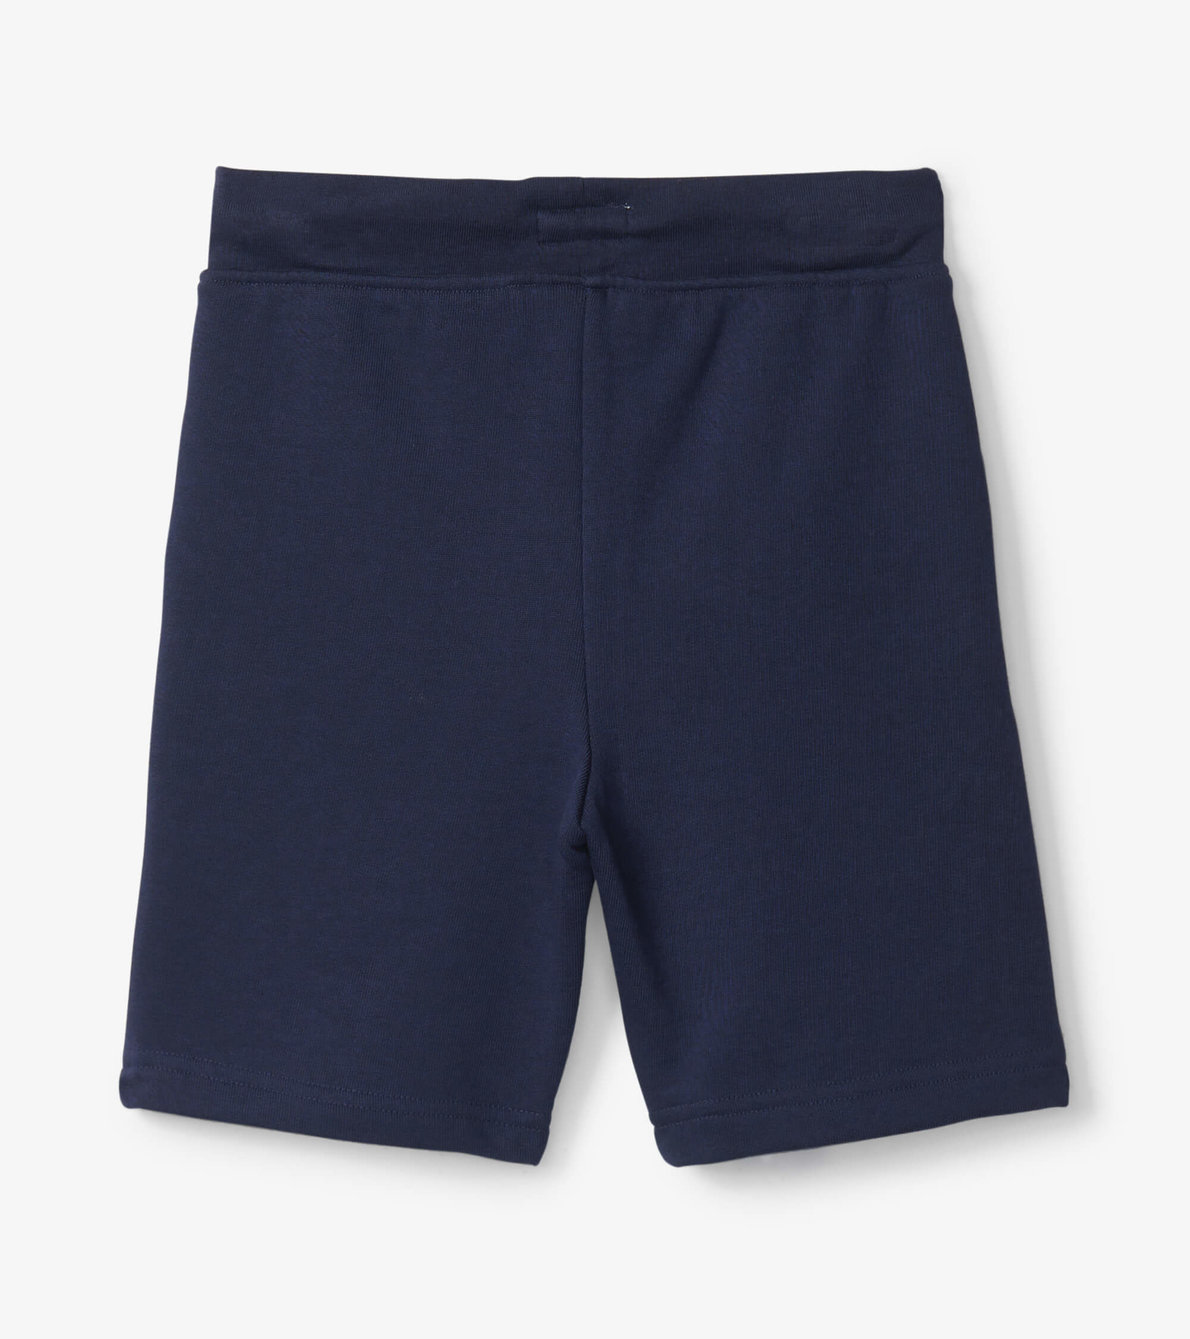 View larger image of Navy Terry Shorts